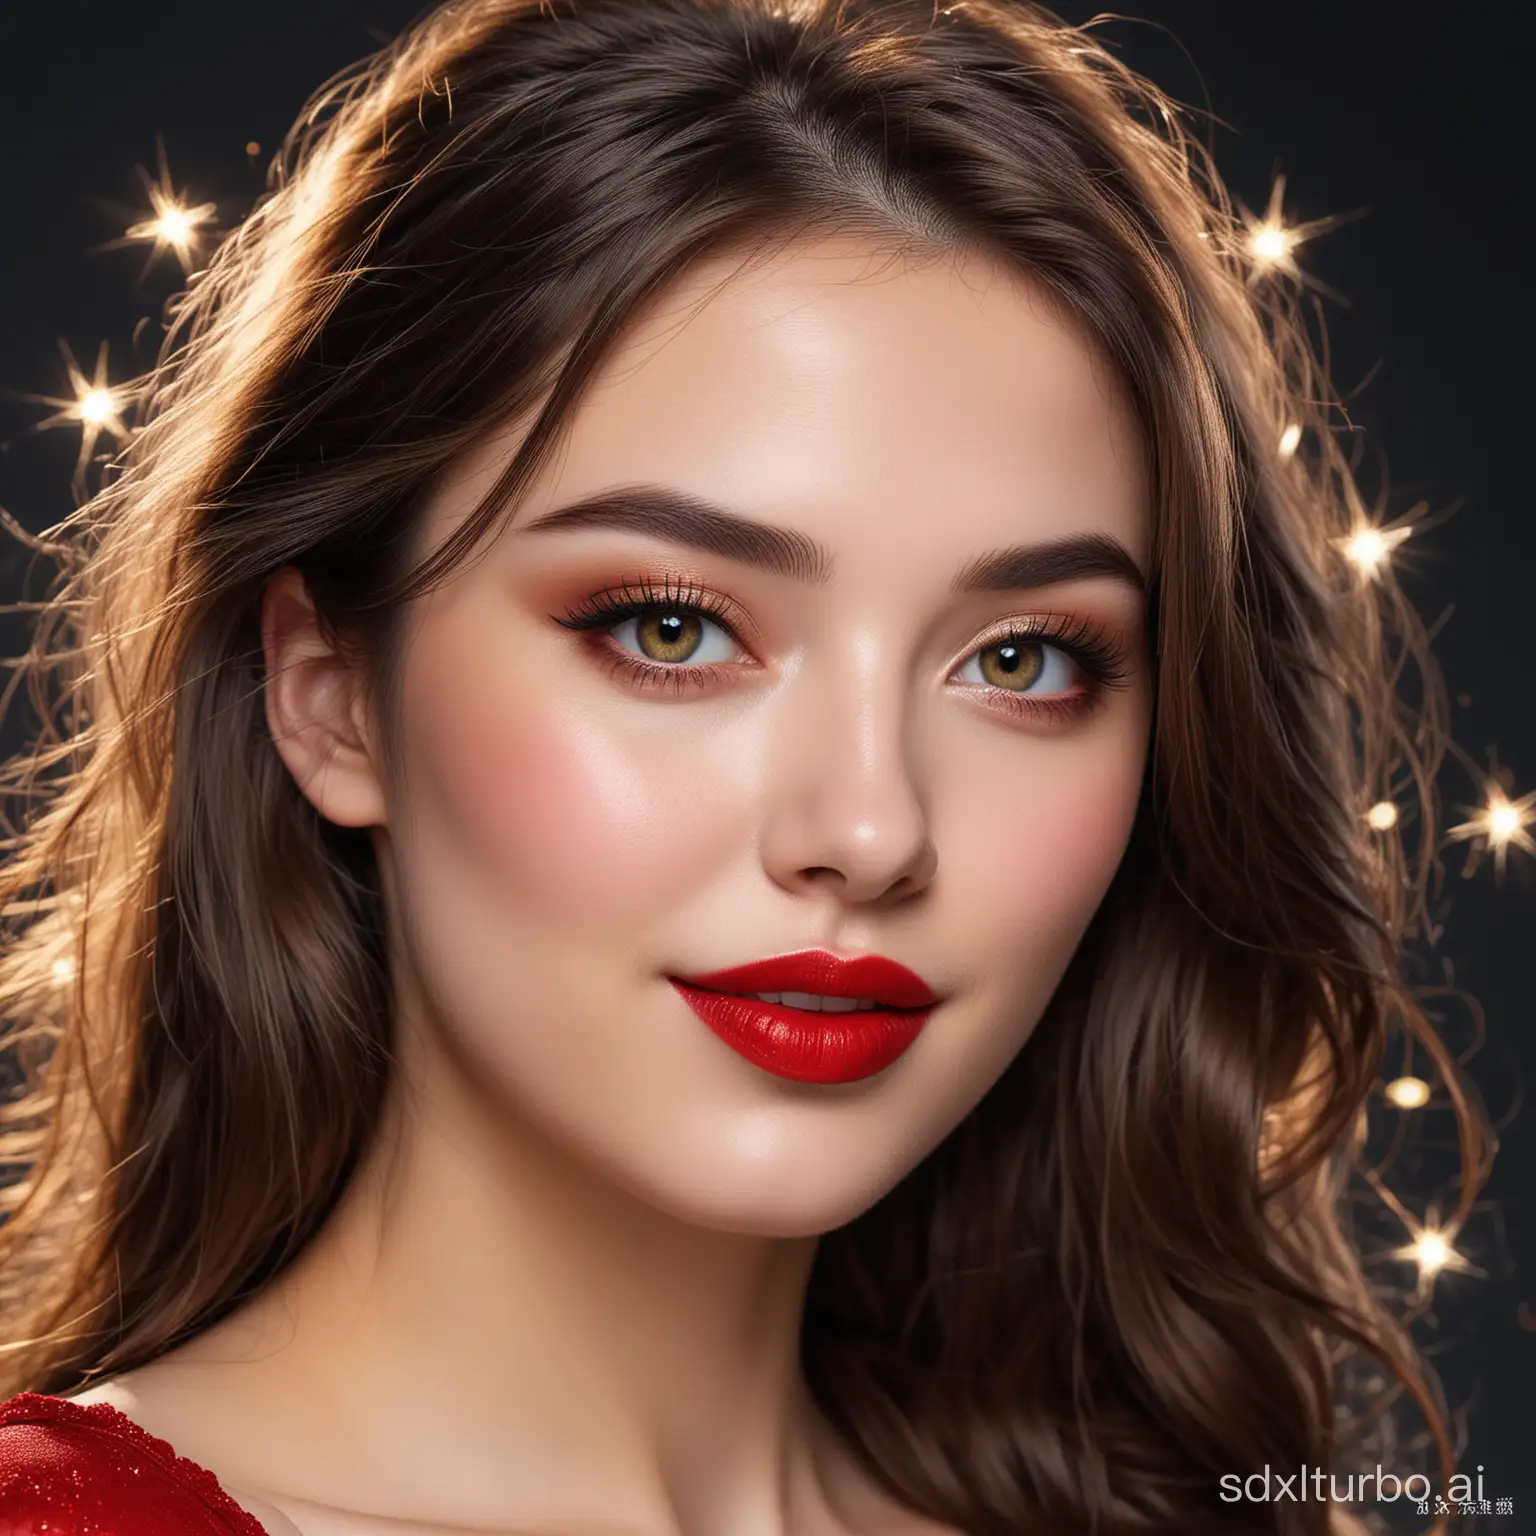 The bright eyes of the beauty, like shining stars, are full of wisdom and agility; while the slightly curved red lips, seem like a smiling fairy, enchanting people.